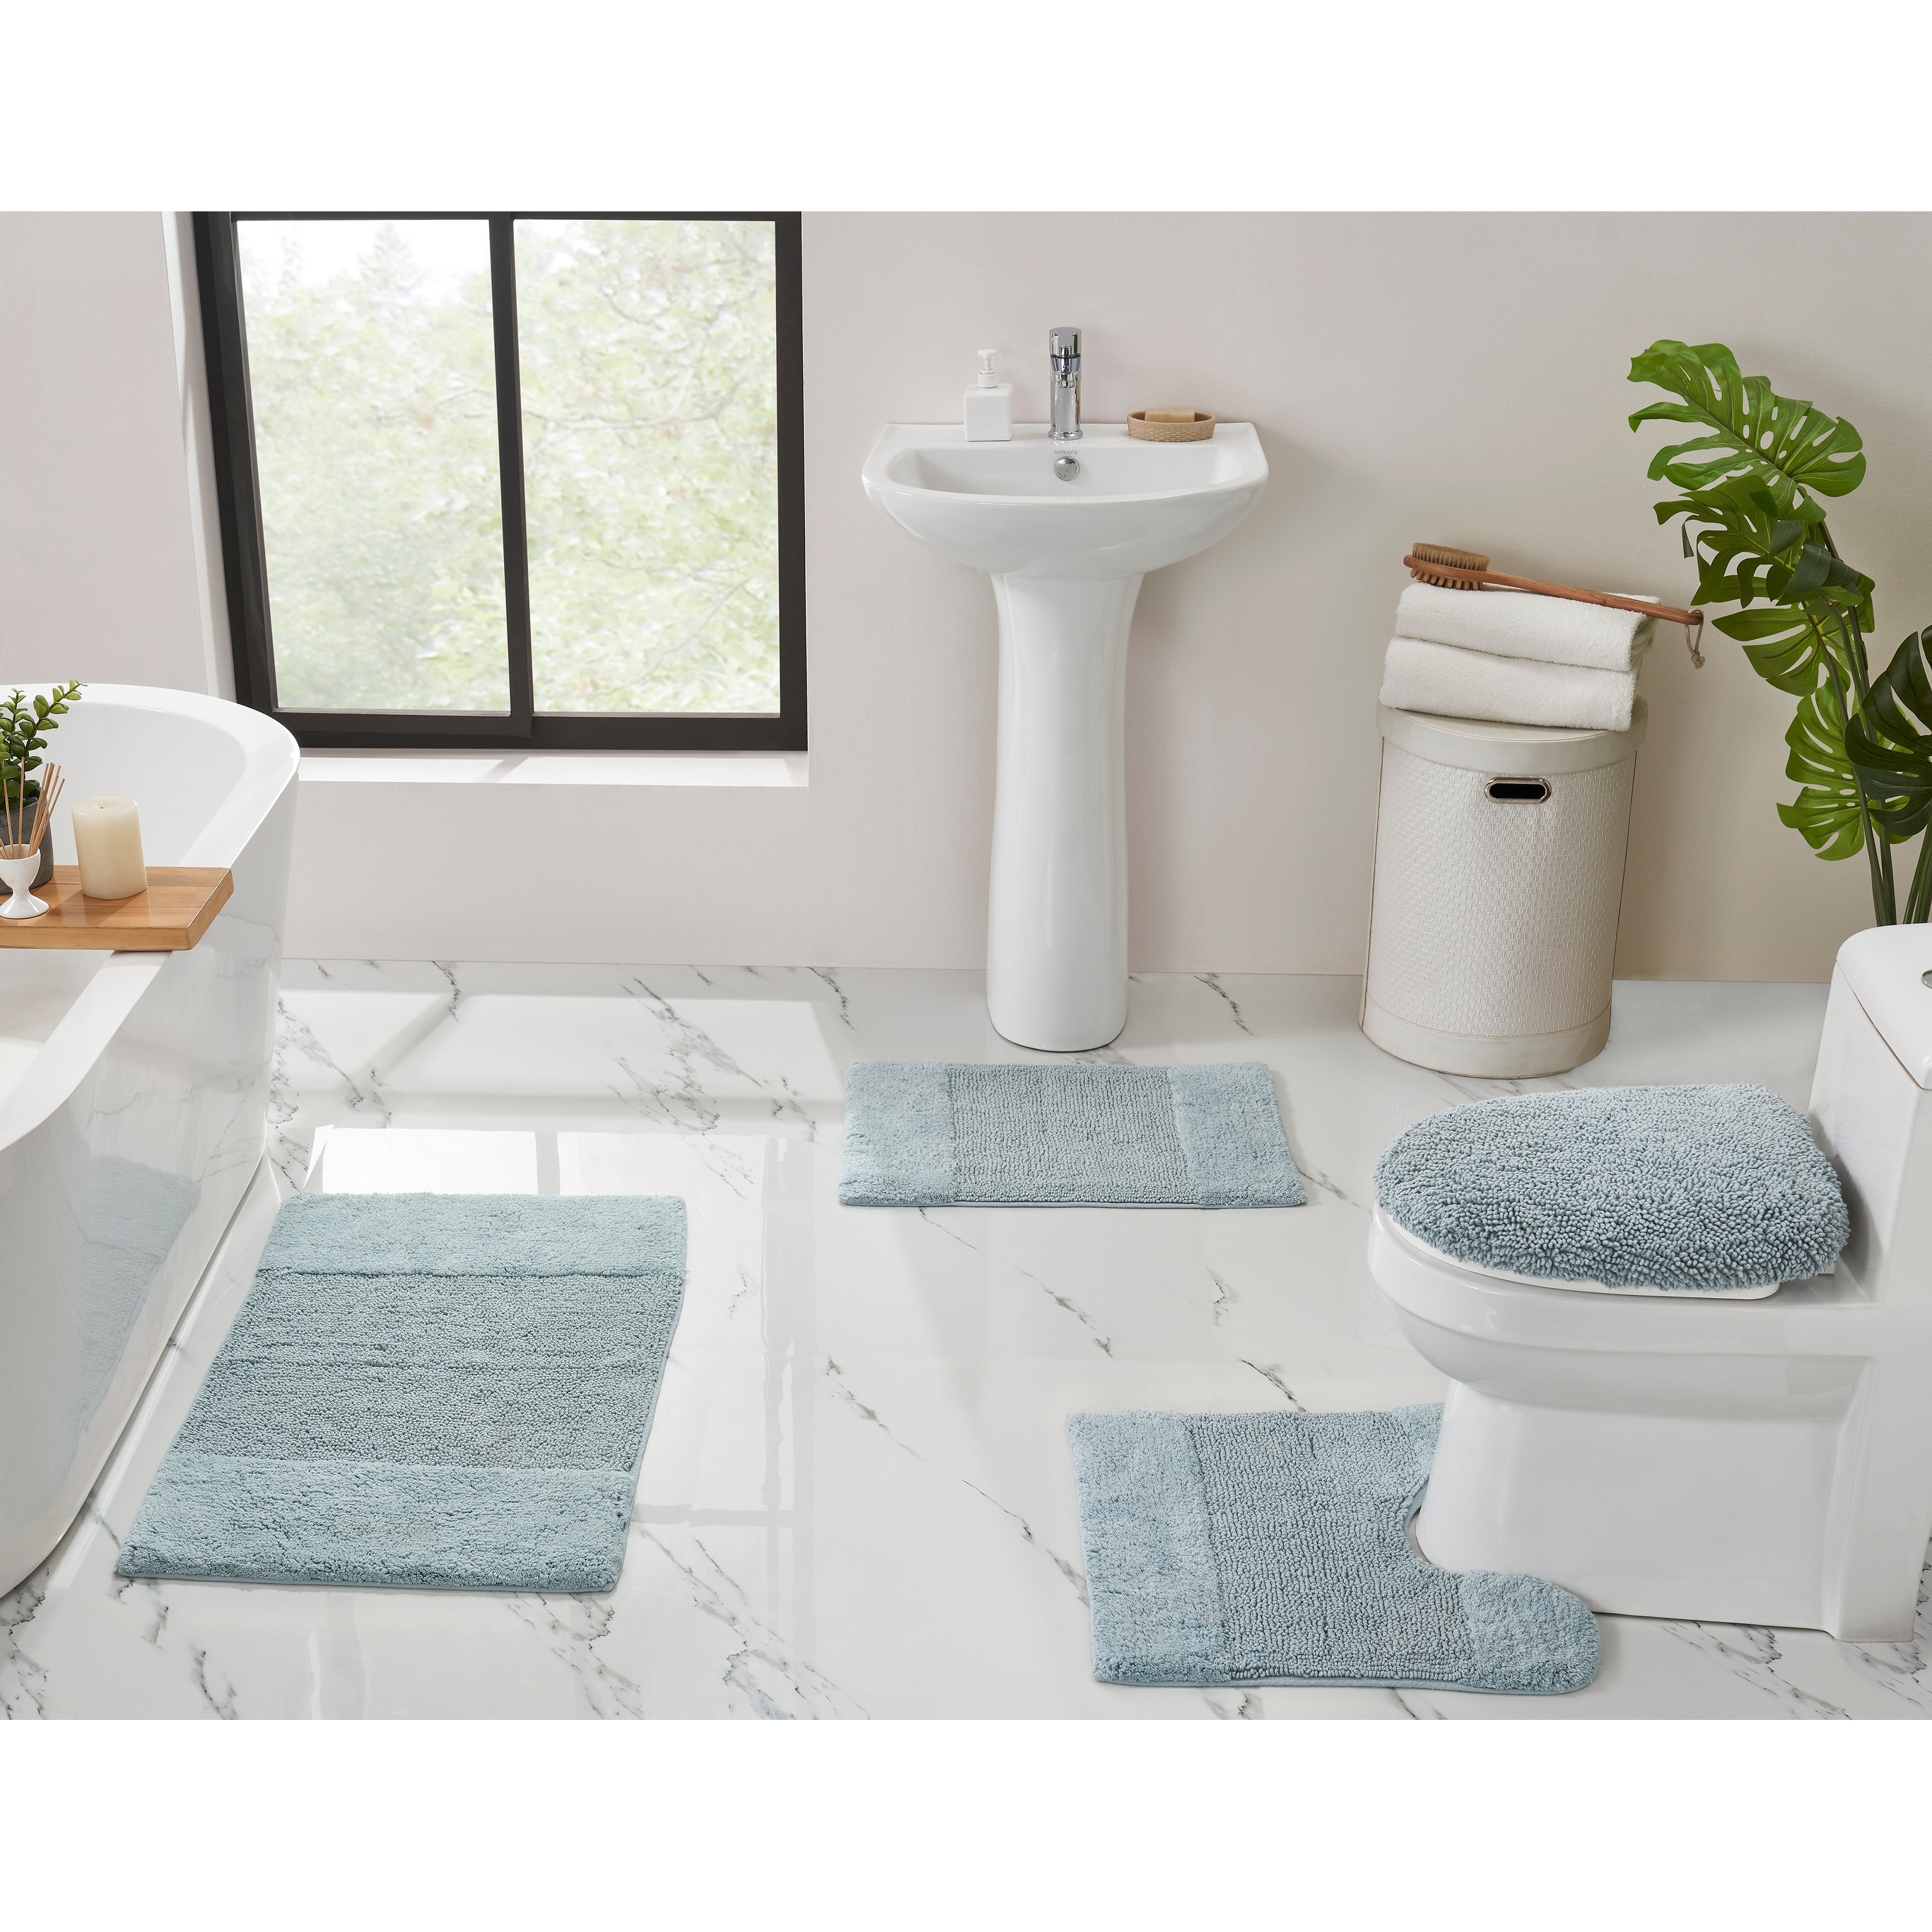 https://ak1.ostkcdn.com/images/products/is/images/direct/cfbe069655afe3bdea2e336255d91940ffc10dbf/Better-Trends-Granada-Collection-Bath-Rug%2C-100%25-Cotton.jpg